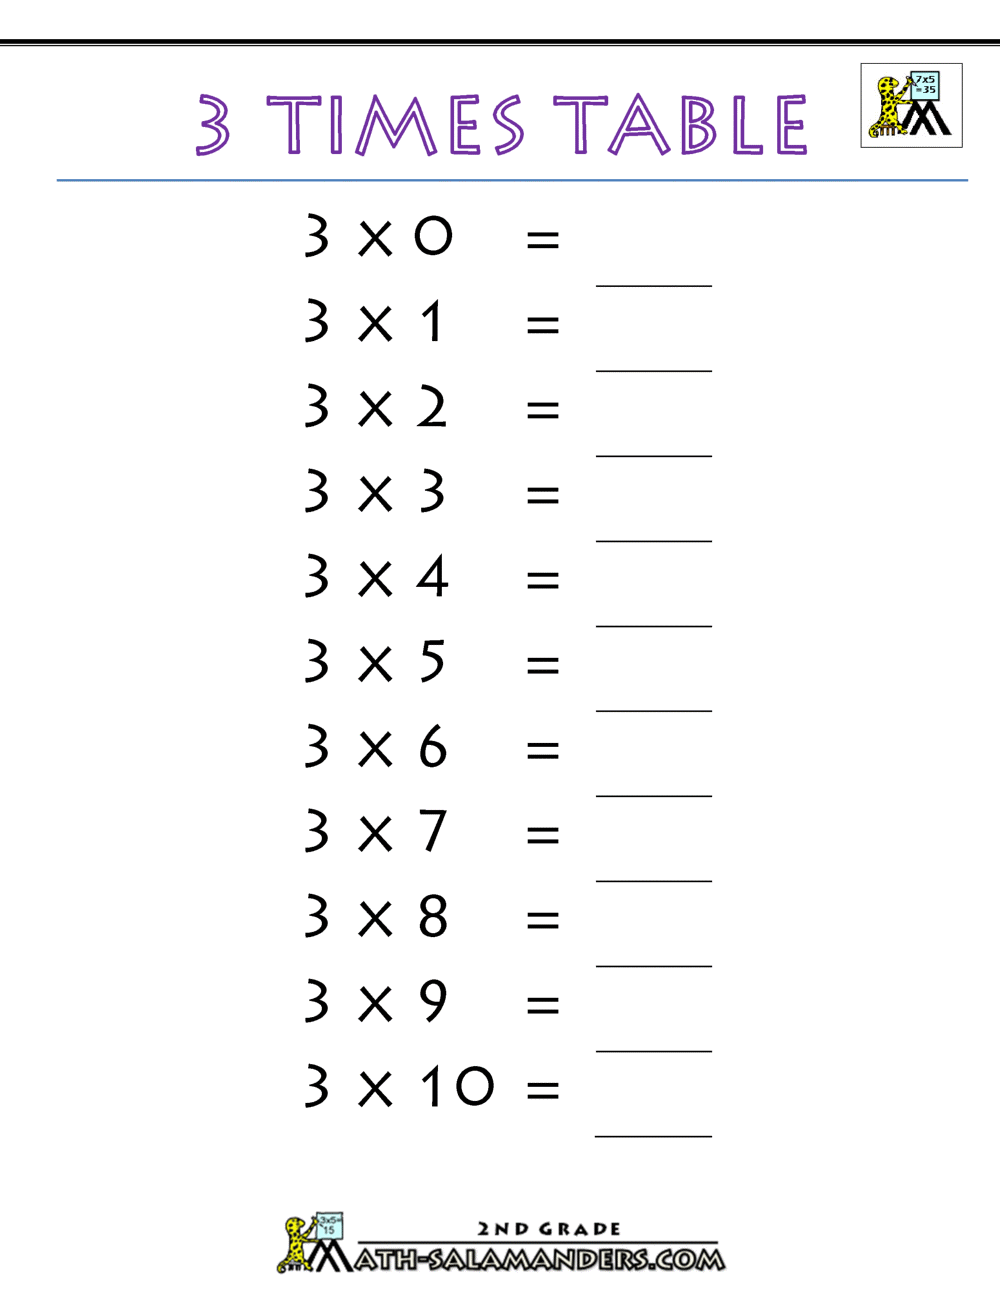 practice-math-sheets-5-times-table-test-2-free-printable-multiplication